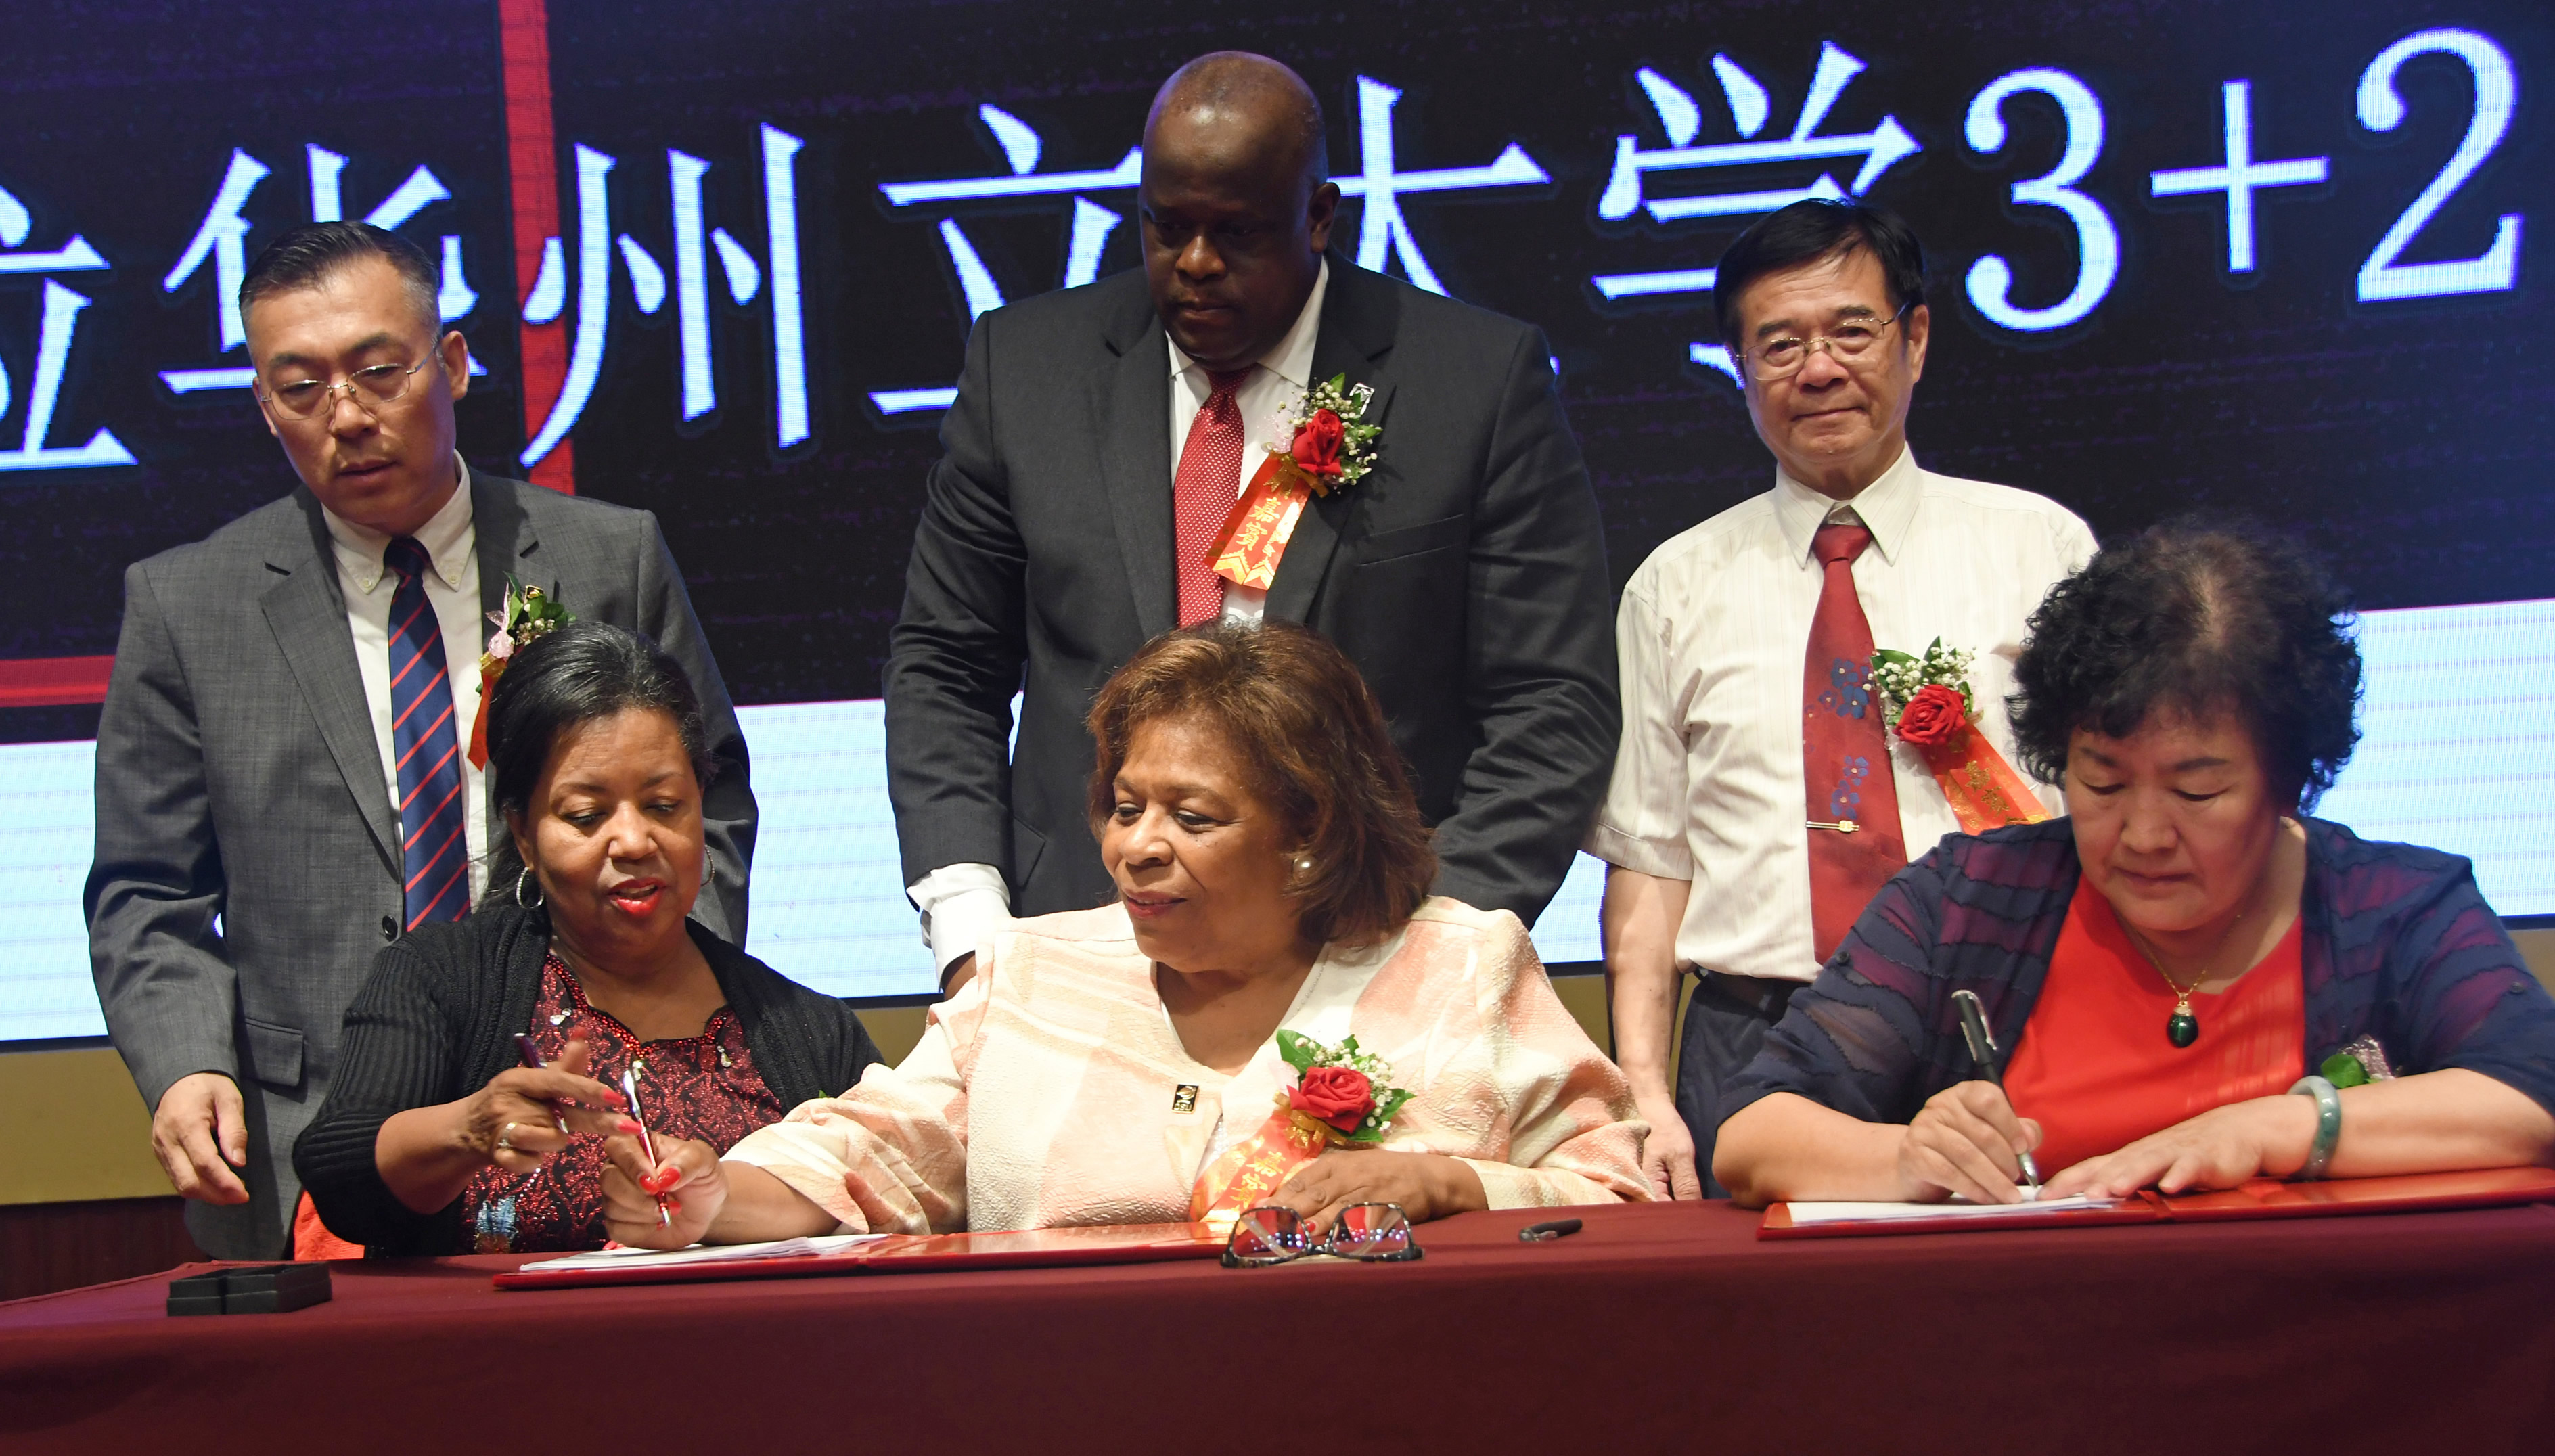 From left during the agreement signing are DSU Board of Trustees Chairwoman Devona Willliams, DSU President Wilma Mishoe and Li Mingzhen, president of Boya International Education, which the Jiaozuo Industry and Trade Vocational College is under.